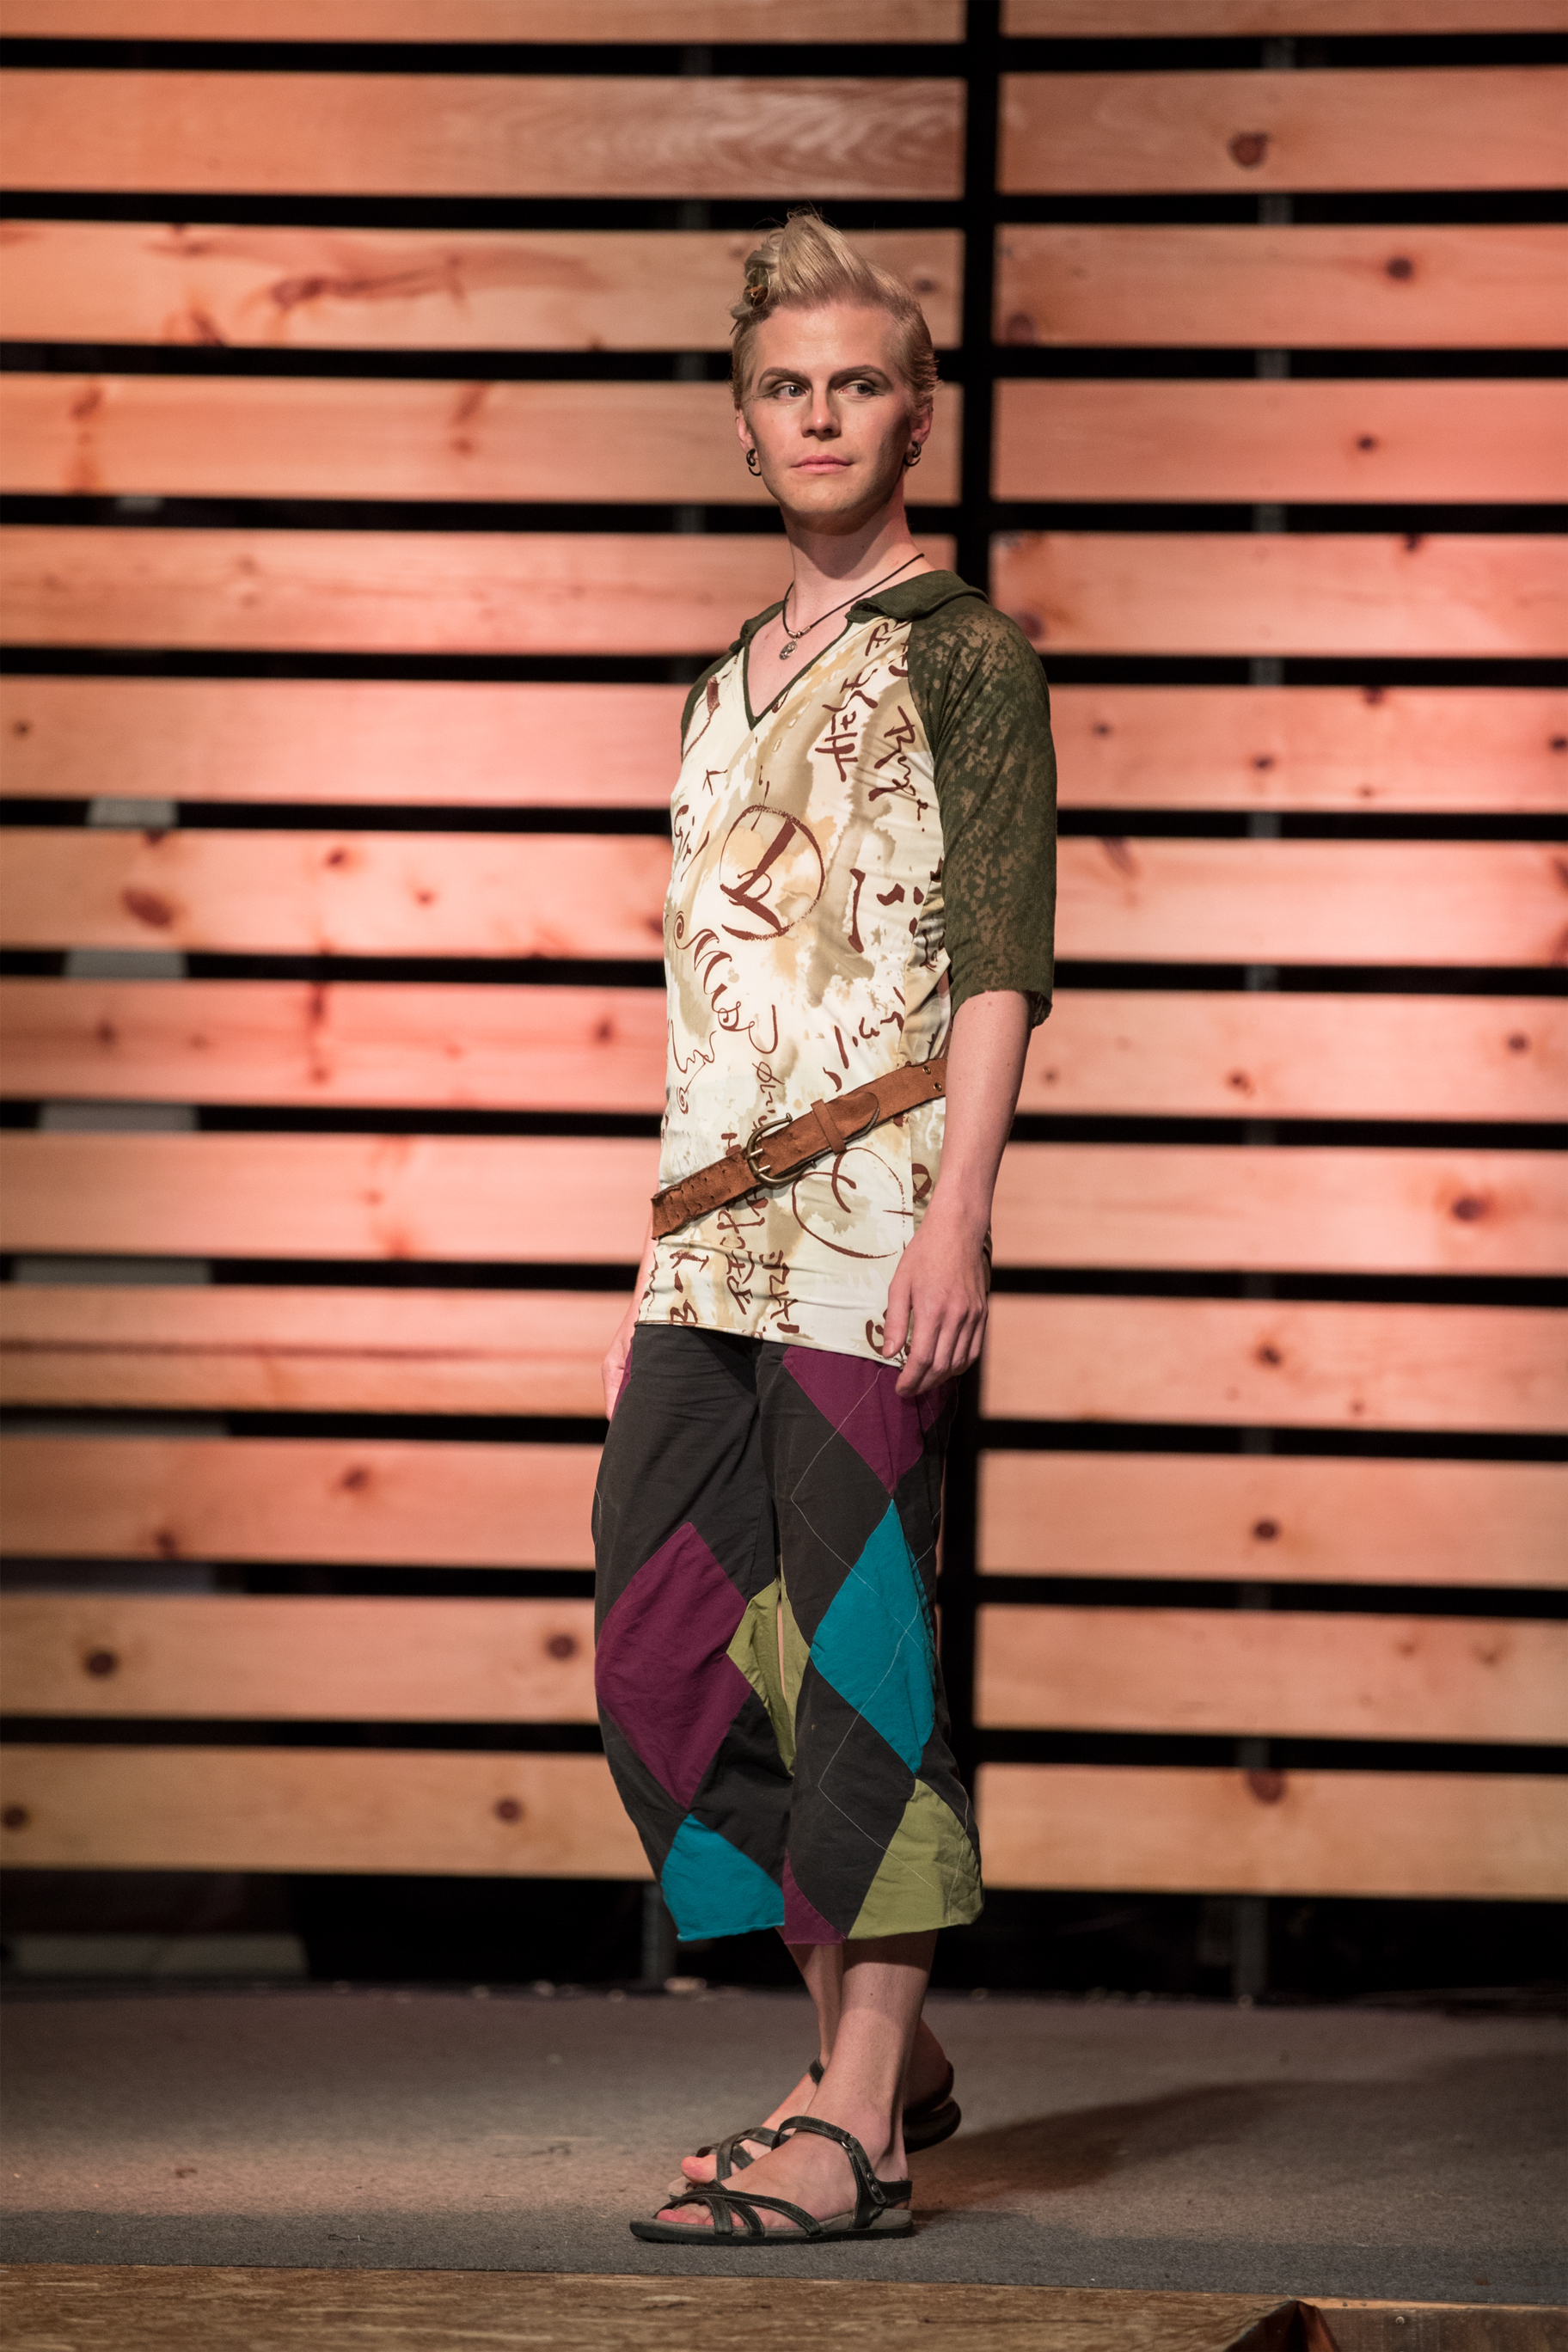 Mission Wear Upcycled Patchwork Fashion Show - 051.jpg